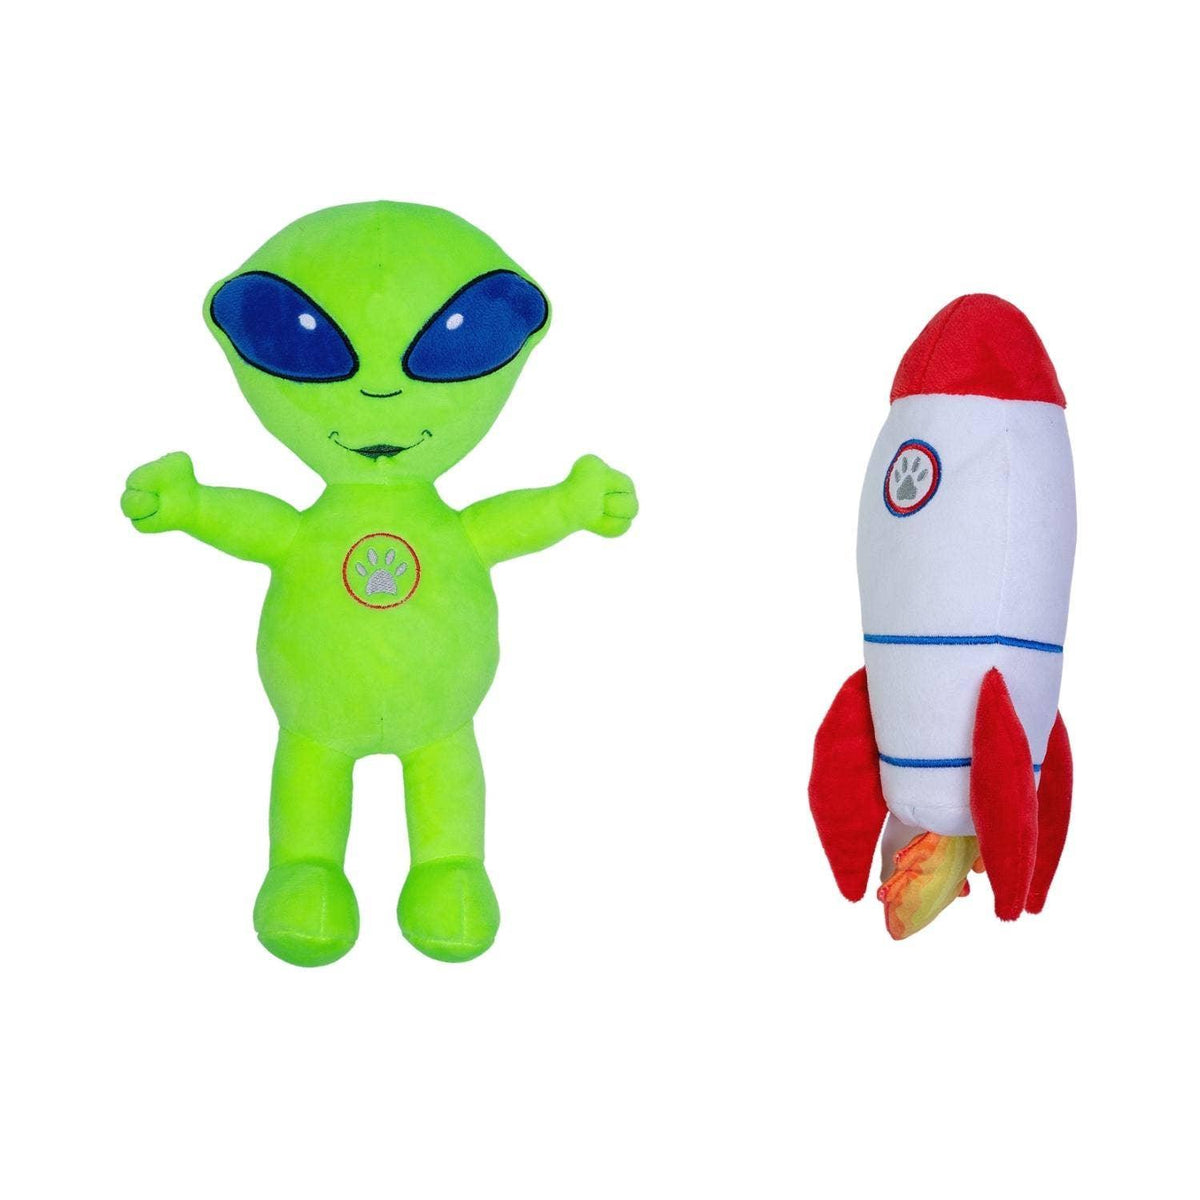 Out of this World Crinkle and Squeaky Plush Dog Toy Combo FajarShuruqSA